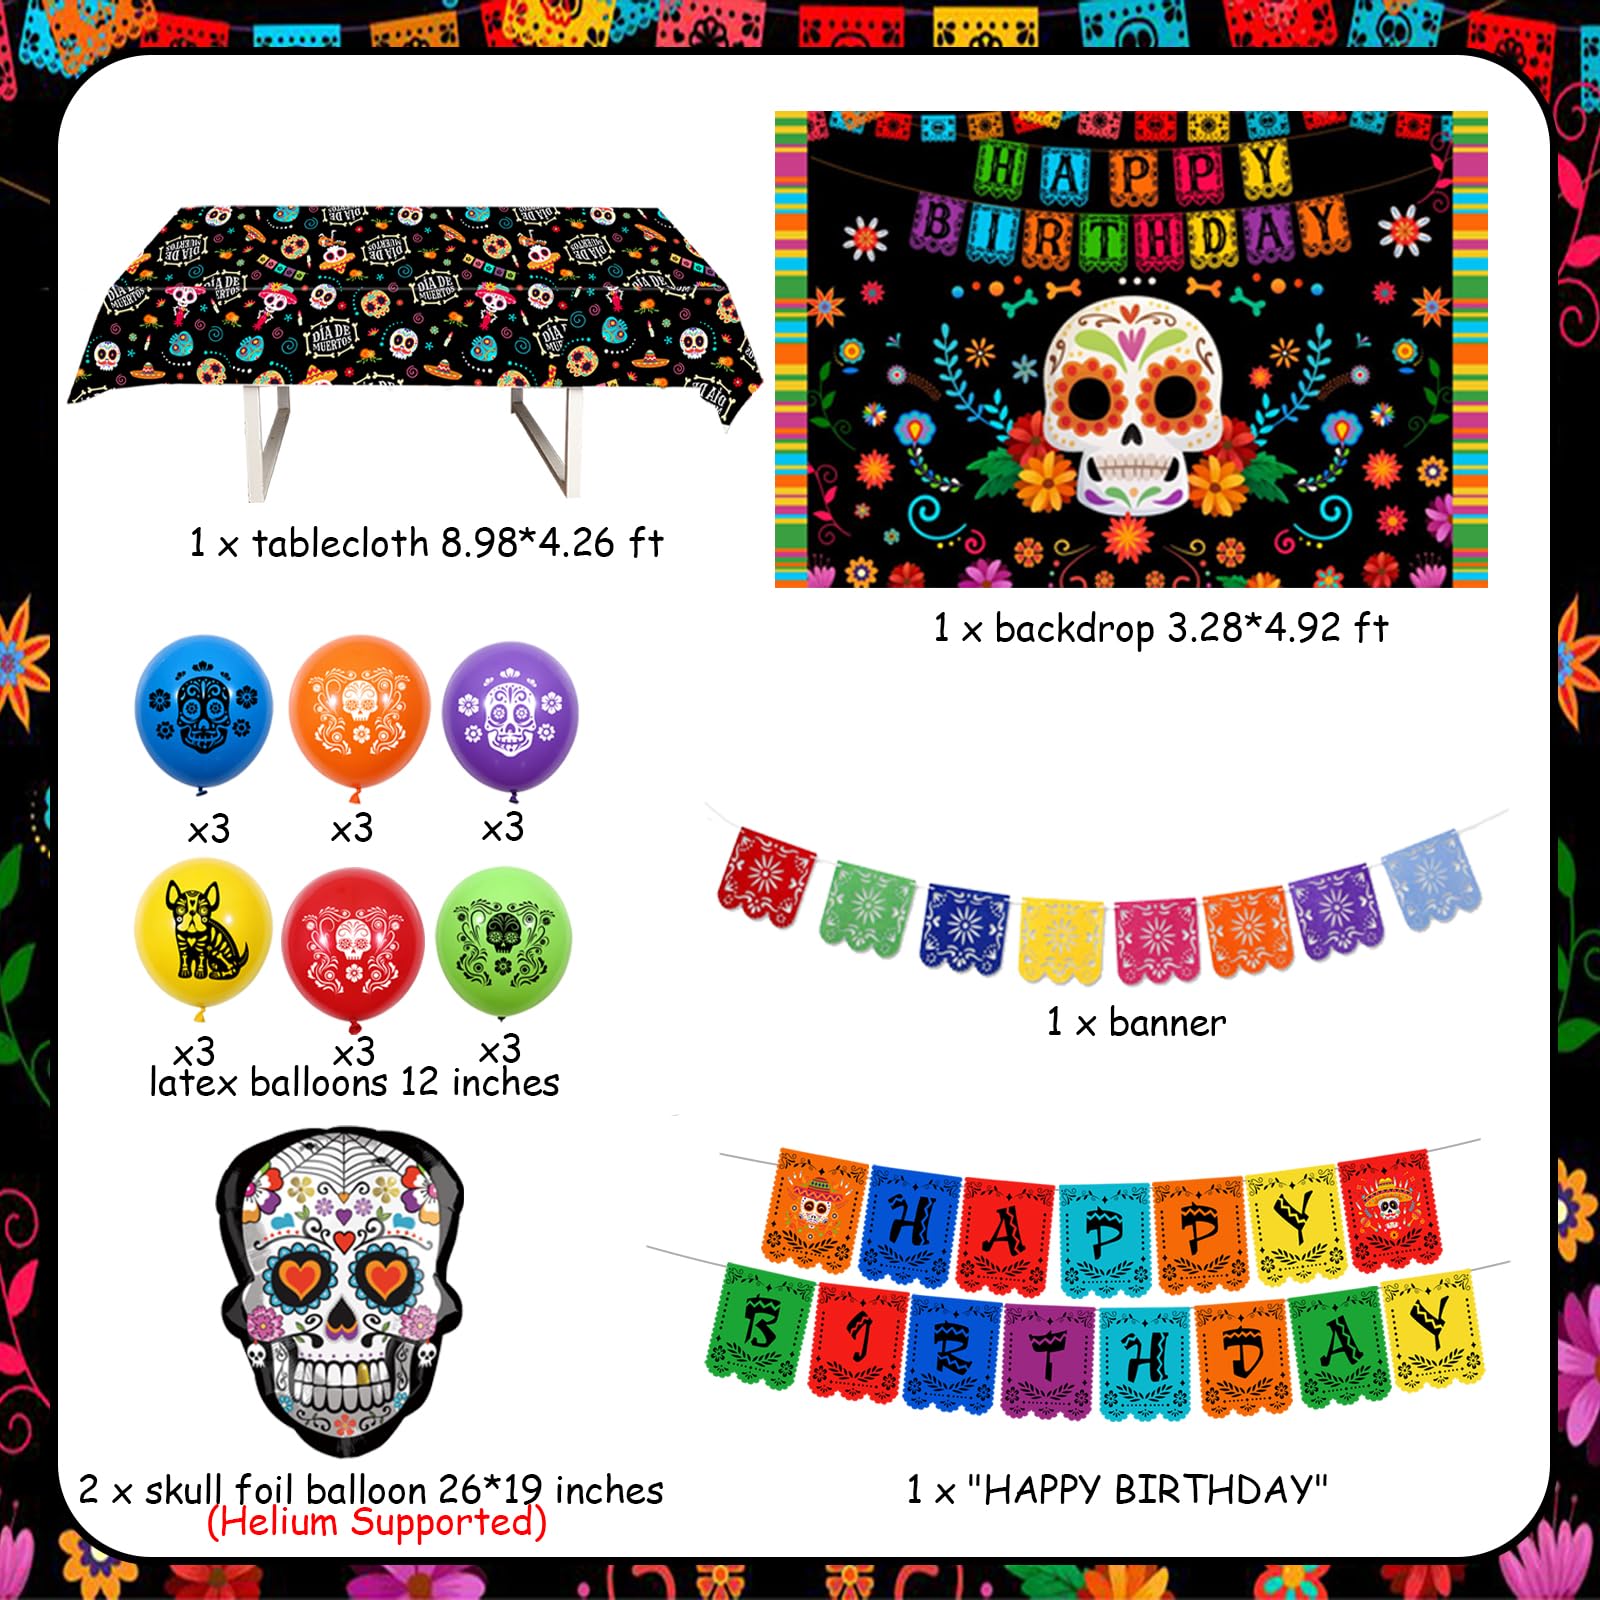 Fangleland Day of The Dead Theme Birthday Party Decorations for Boy Girl - Dia De Los Muertos Bday Celebration Party Supplies Balloons Banner Tablecloth Sugar Skull Mexican Backdrop